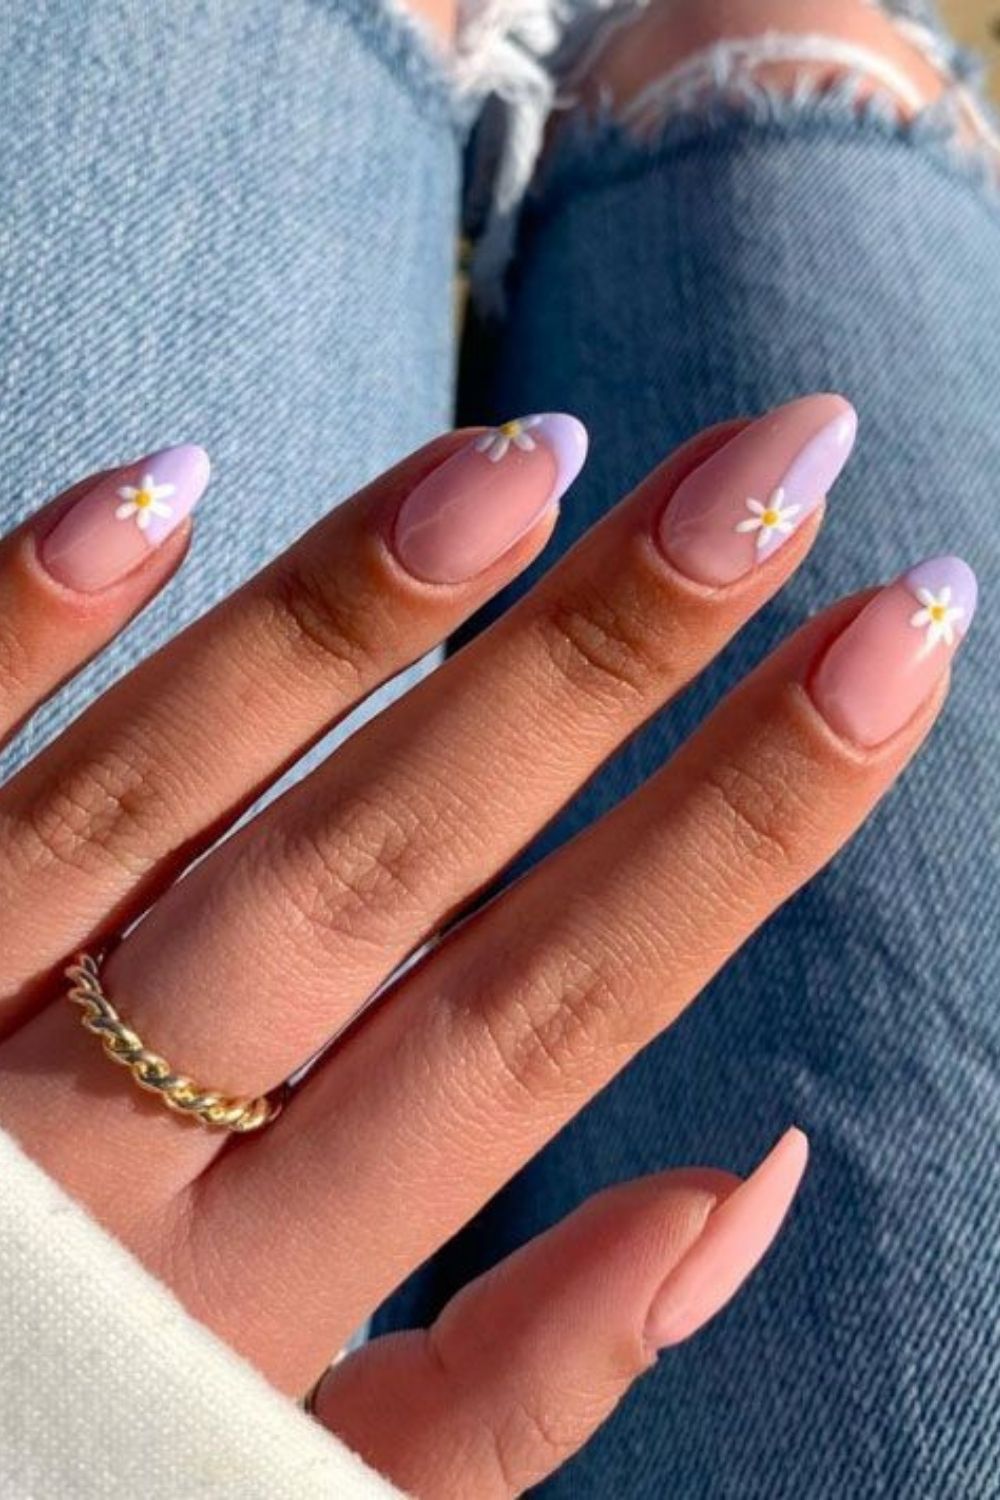 27 of the most insane nail art on Instagram